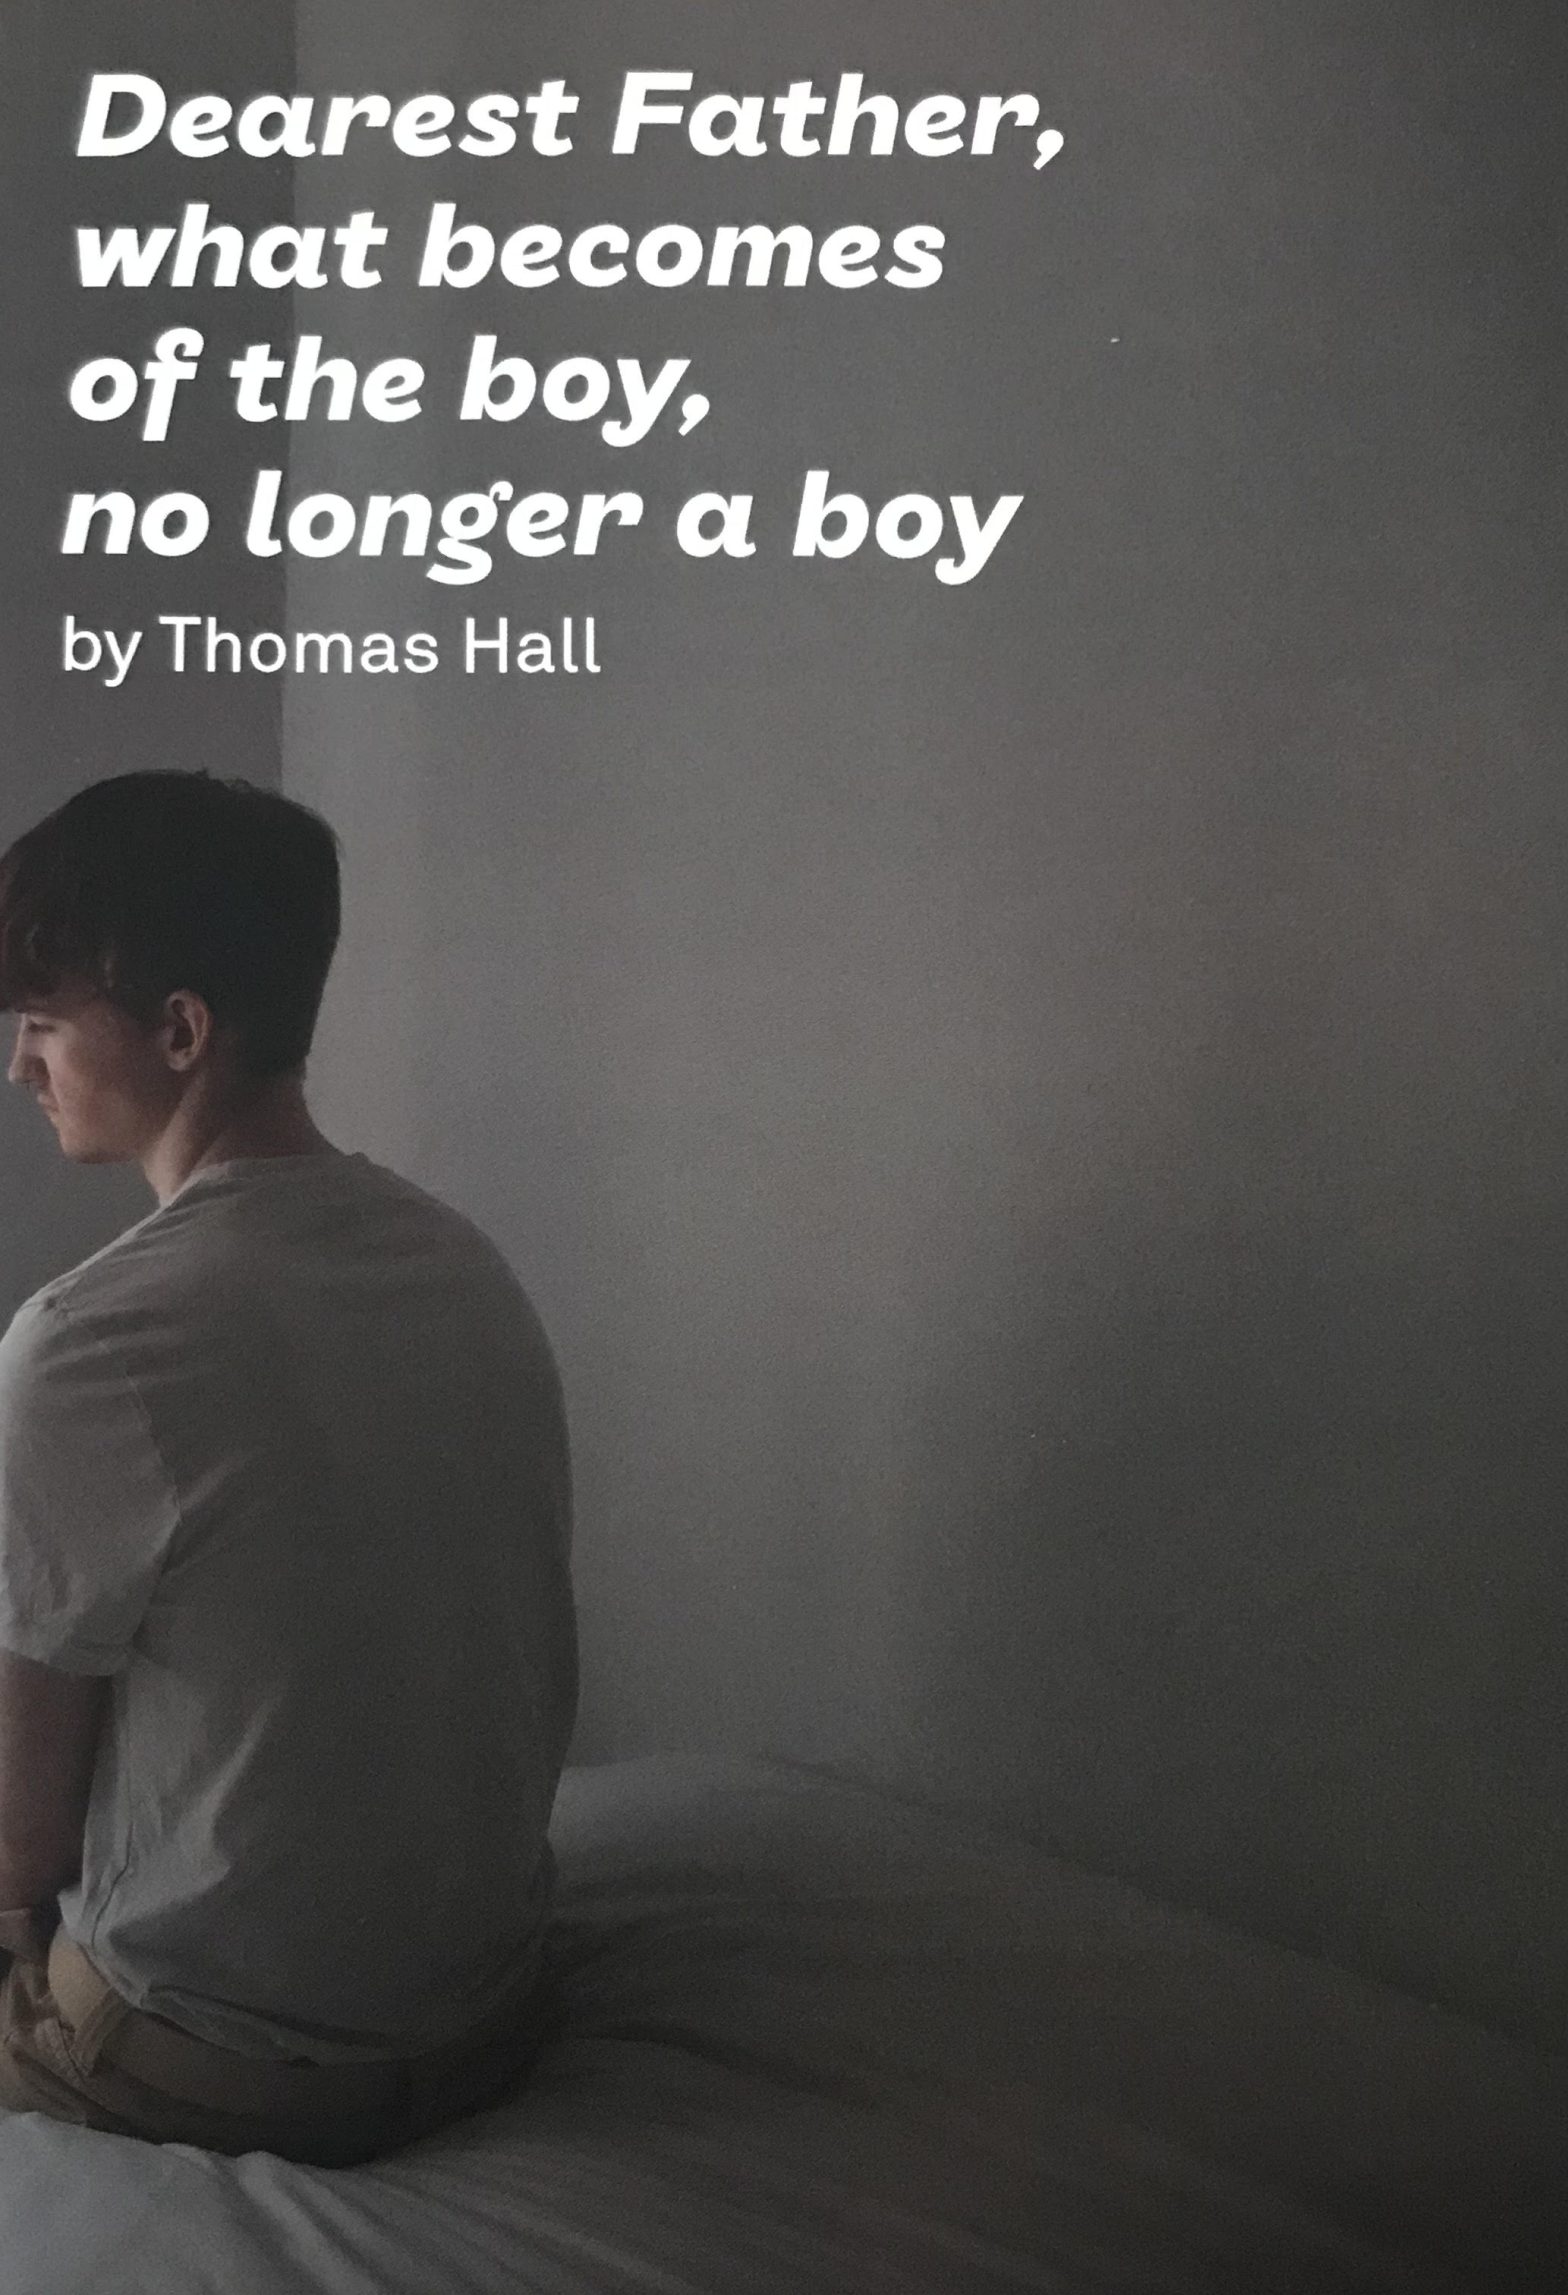 Dearest Father, what becomes of the boy, no longer a boy, Thomas Hall